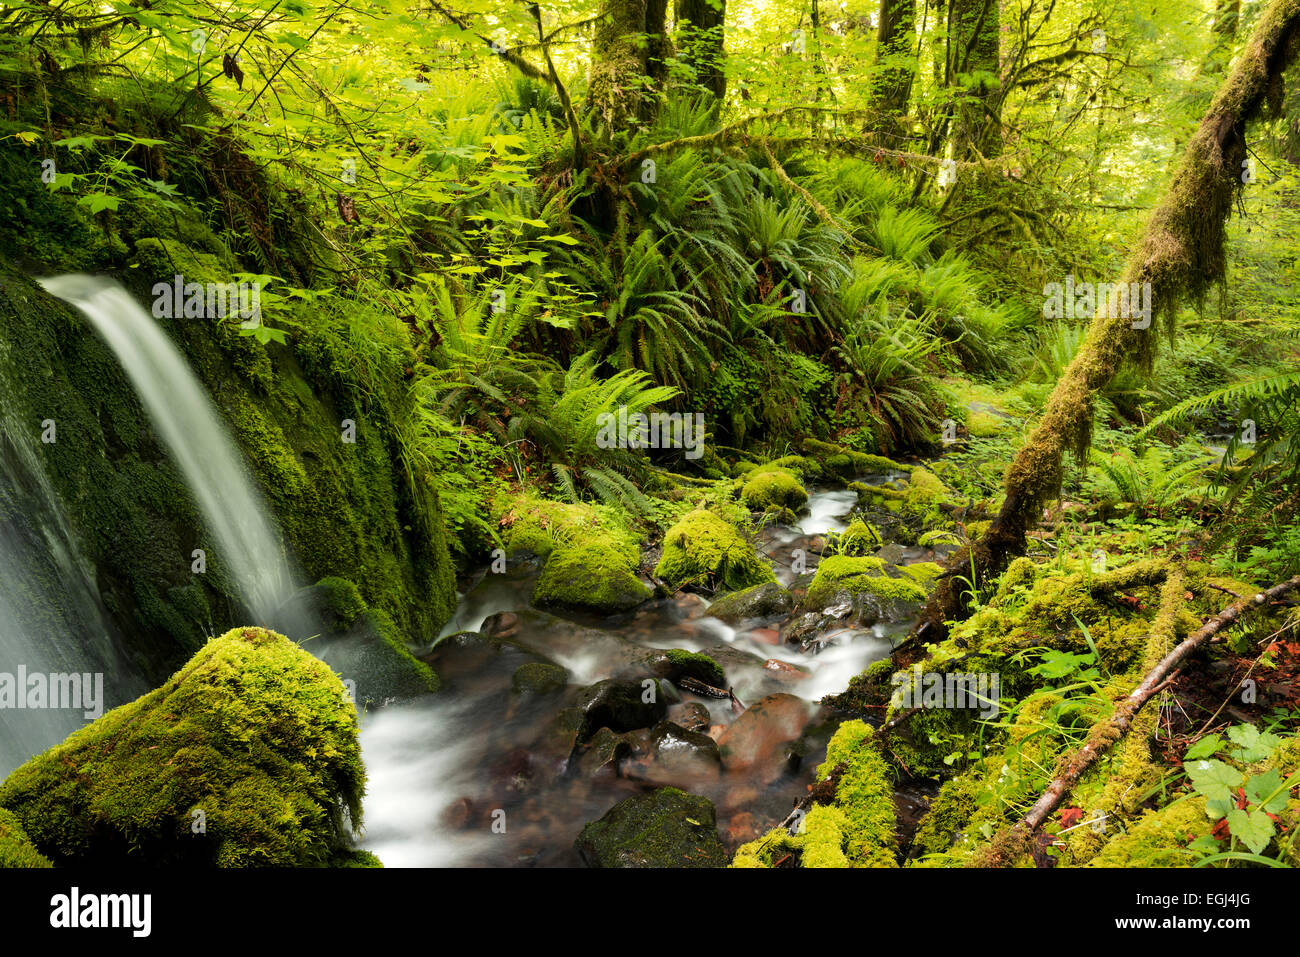 The USA, America, Eden, Creek, Hoh Rainforest, rain forest, Olympic national park, waterfall, green, moss, scenery, wood, Stock Photo